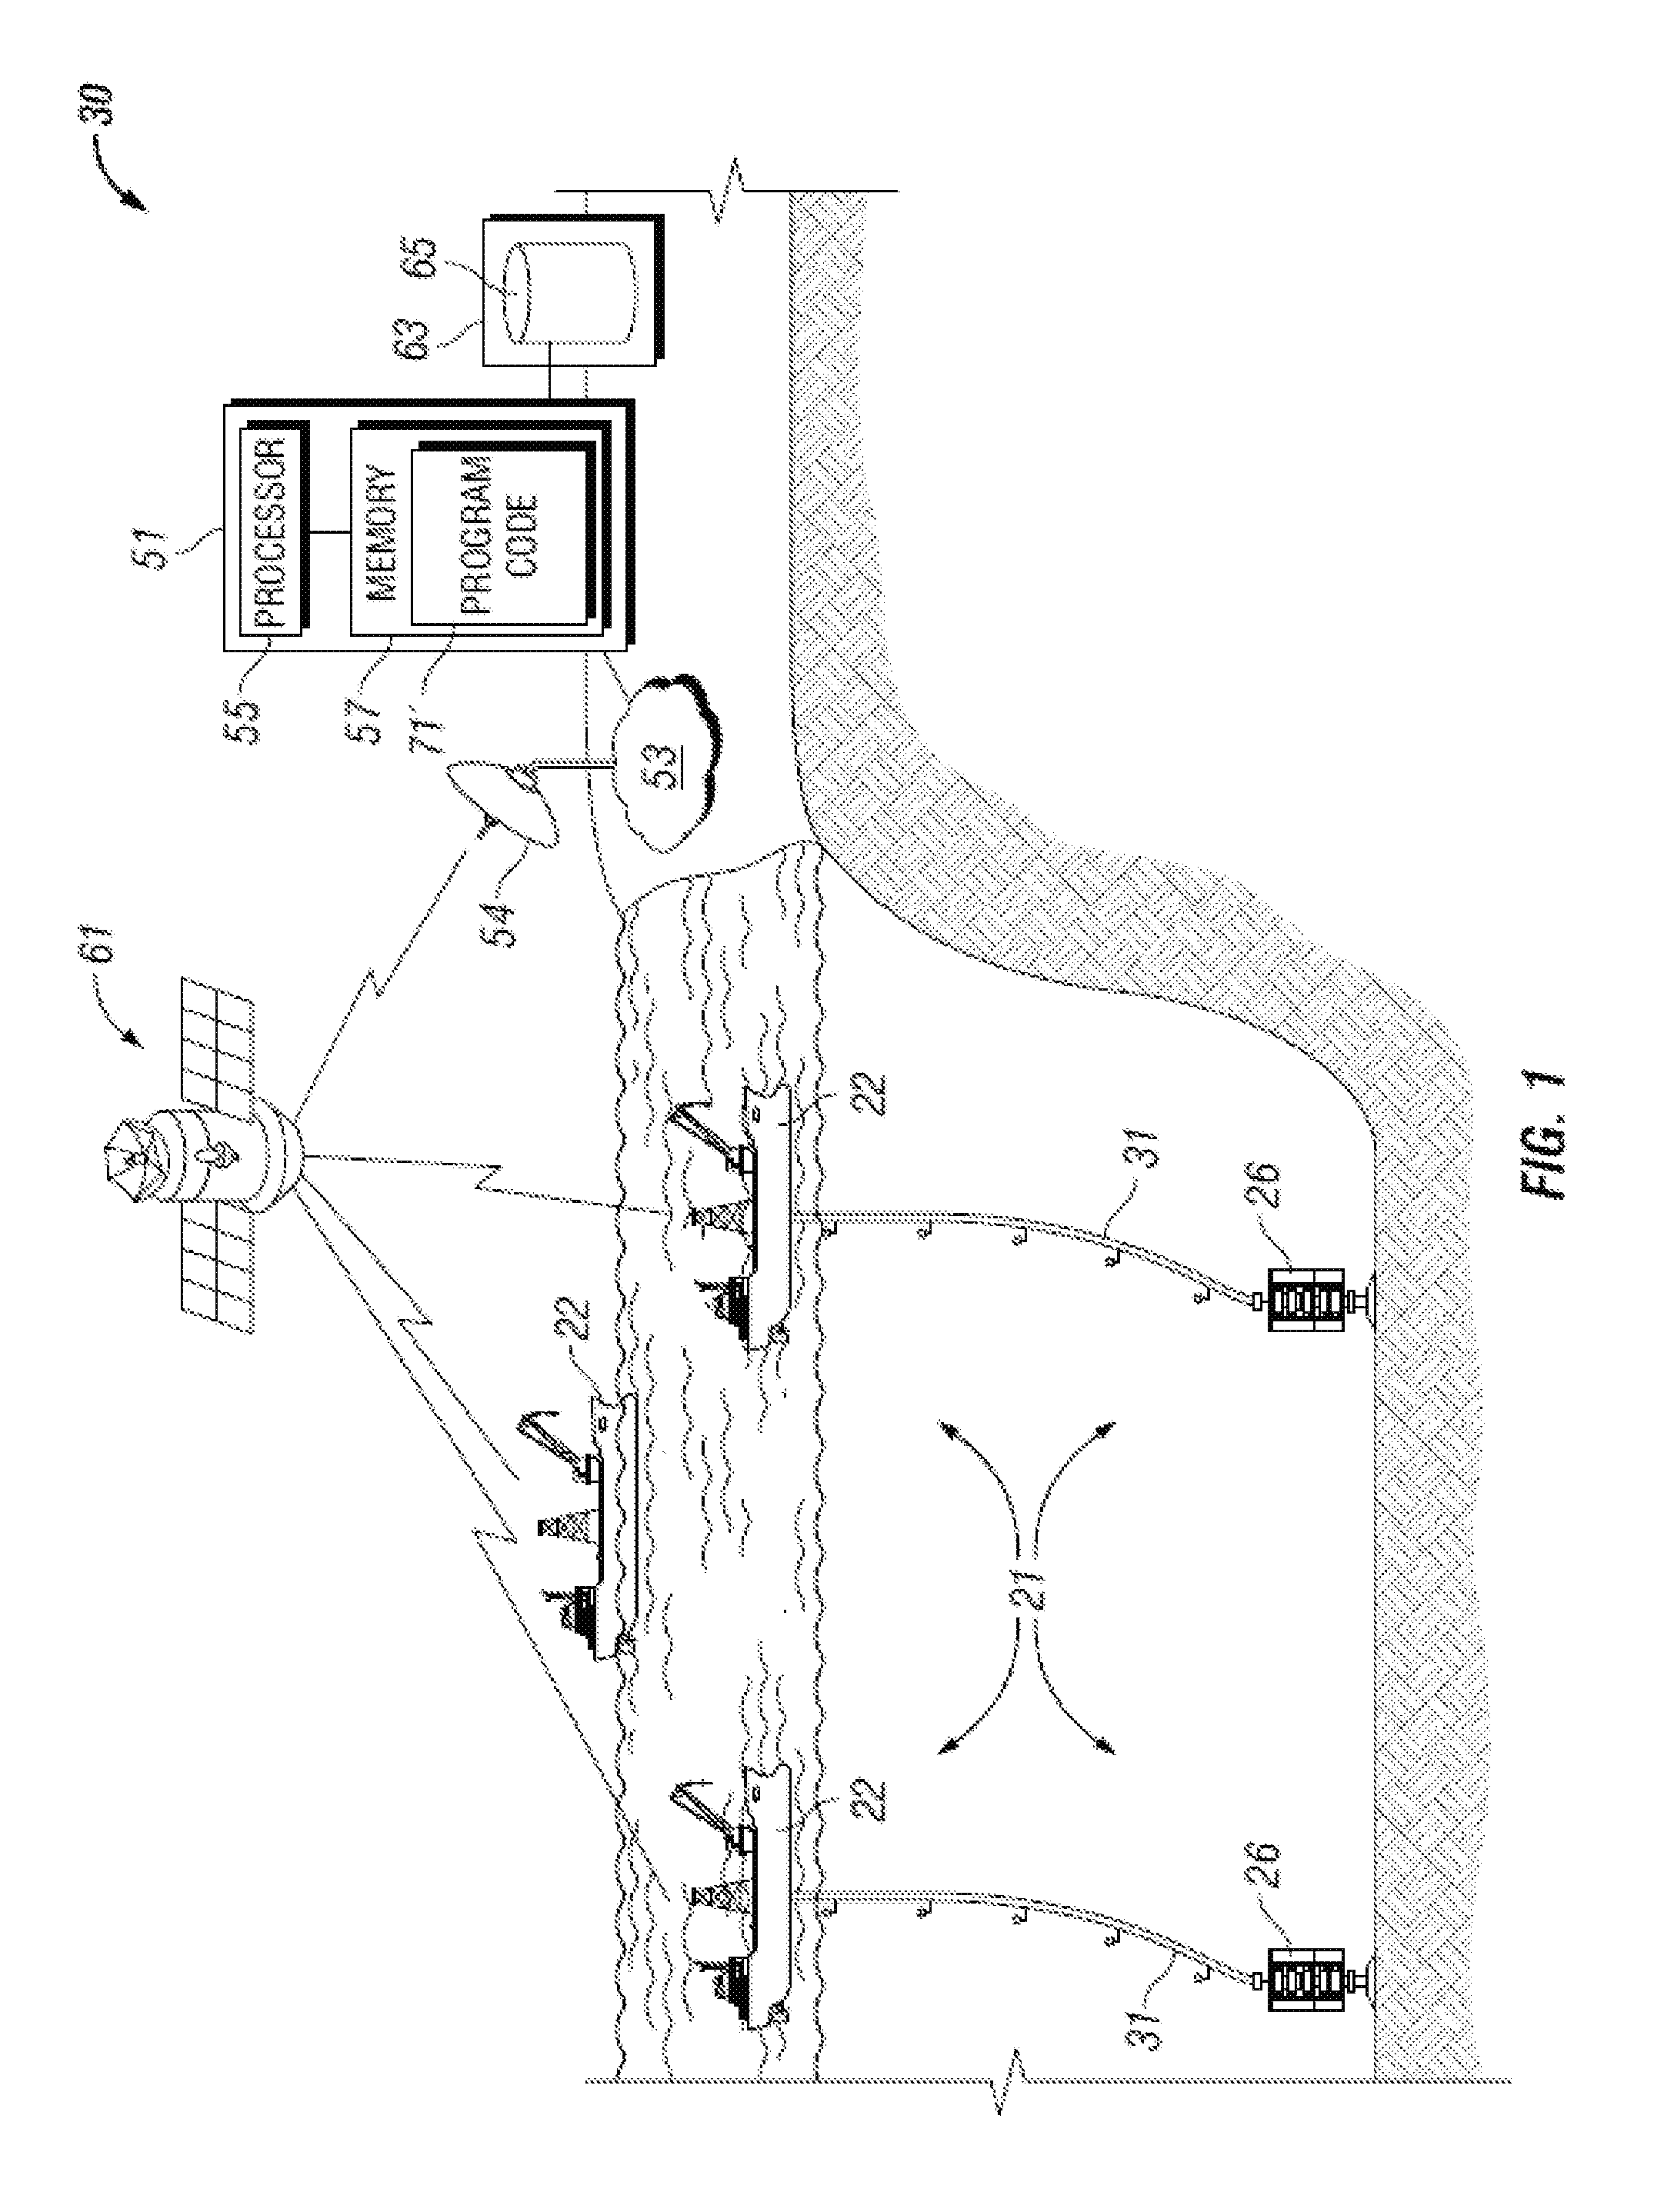 Systems and methods to visualize component health and preventive maintenance needs for subsea control subsystem components